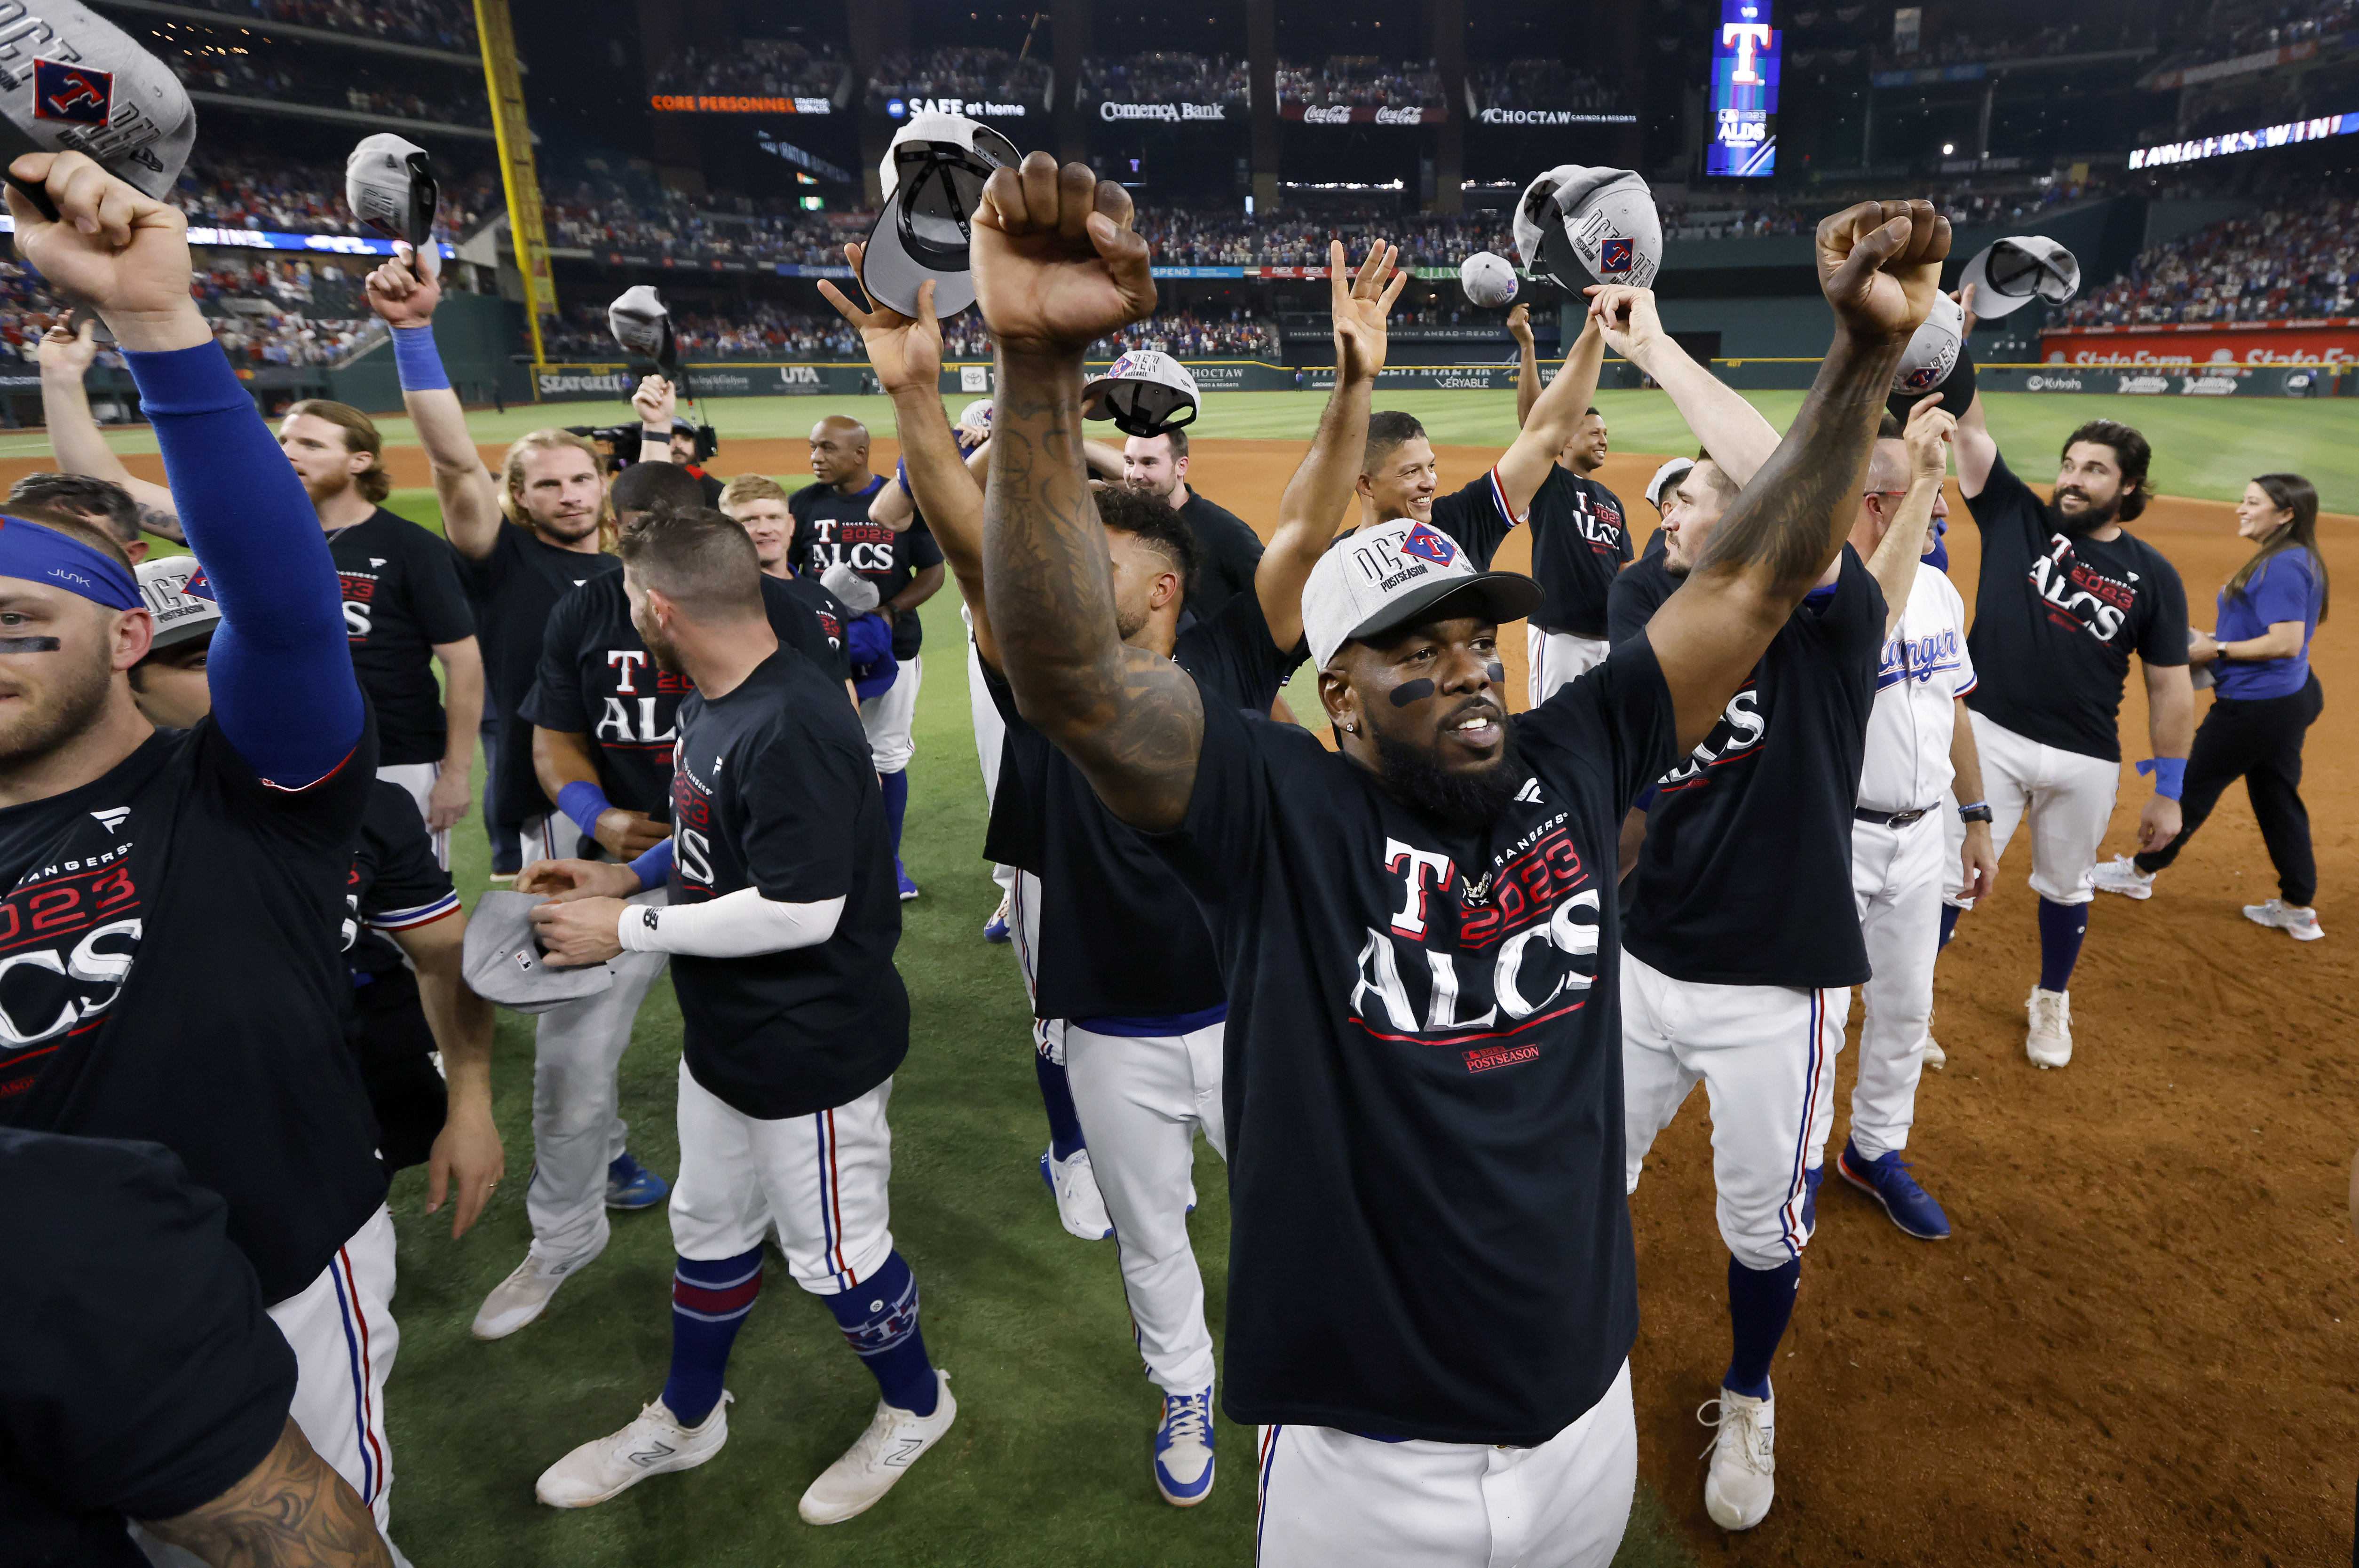 See how excited Houston Astros fans are about the World Series